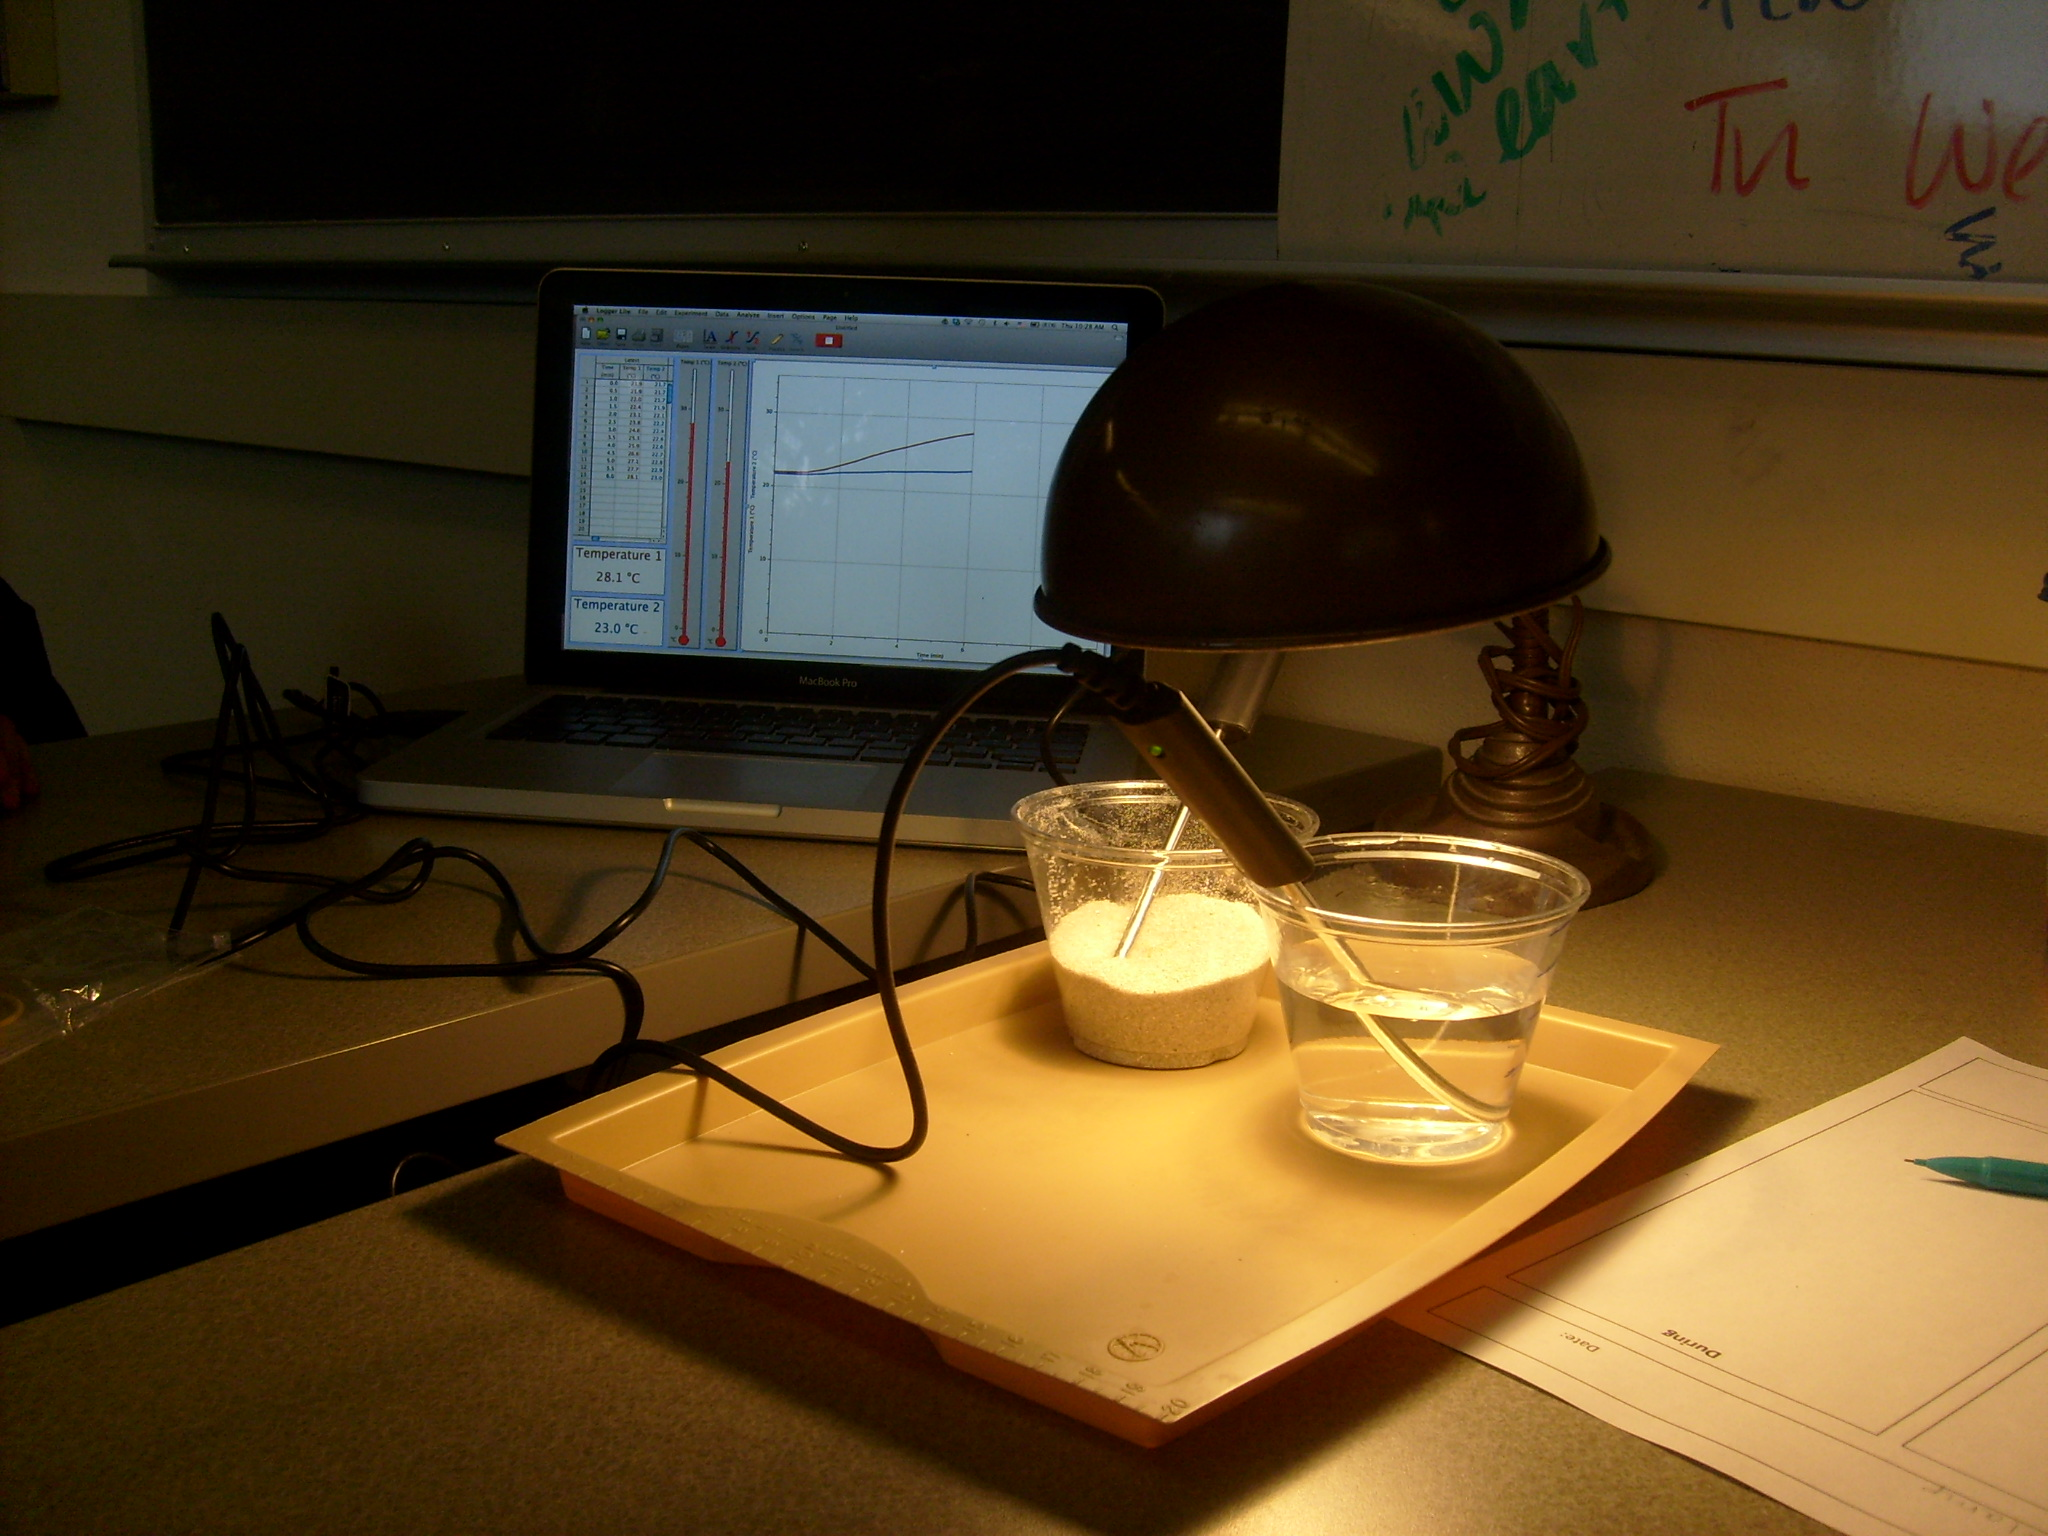 Set up for comparing the way that energy from a lamp warms up sand and water.